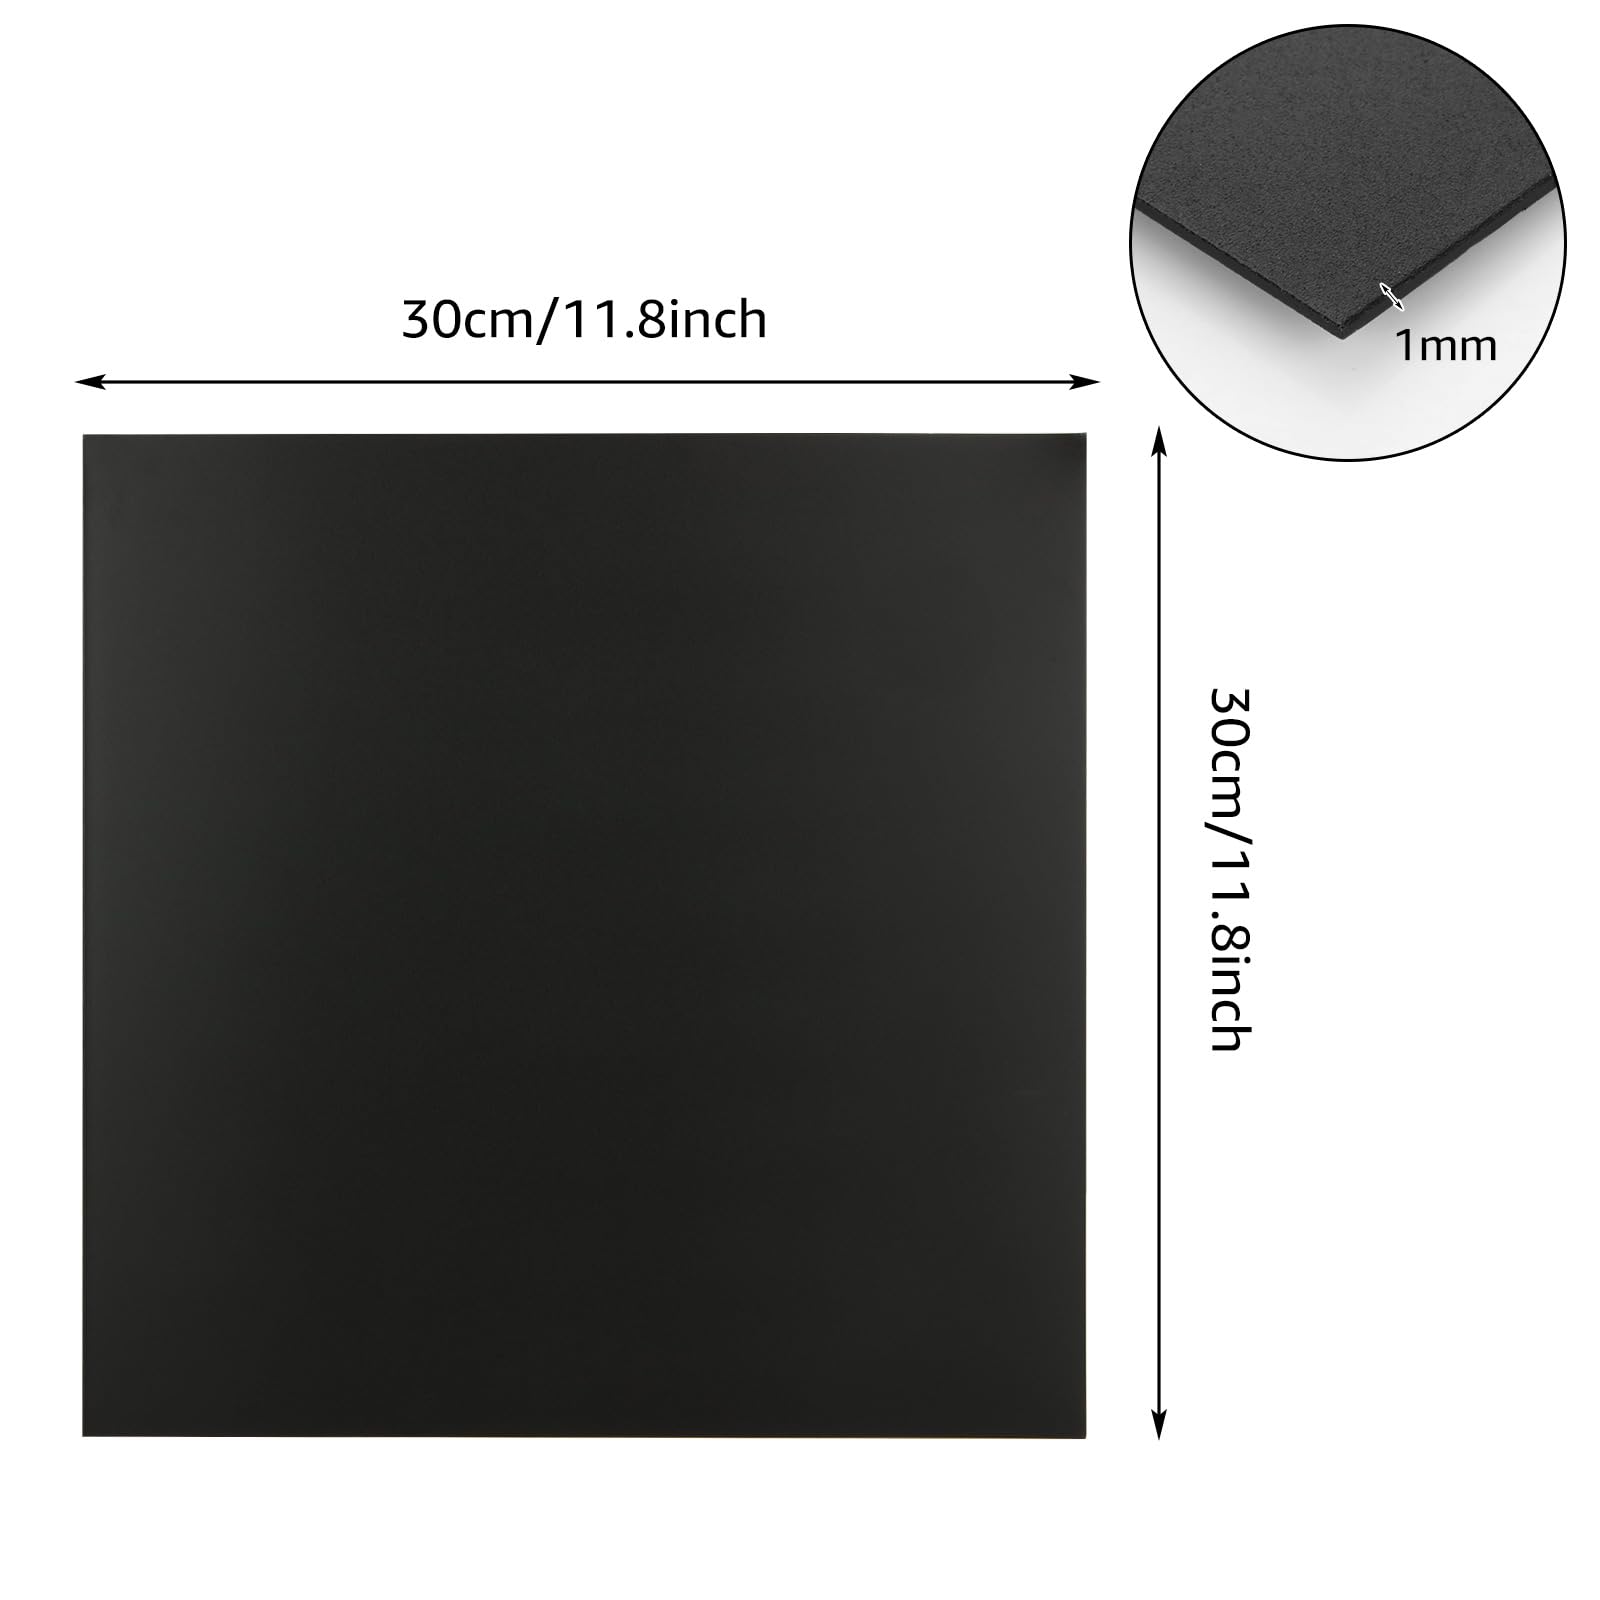 2 Pack Black Anodized Aluminum Sheet Metal 12 x 12 x 1/25 Inch (1mm Thick) Anodized Aluminum Metal Plates Blanks for Laser Engraving, Crafting, Home Decoration